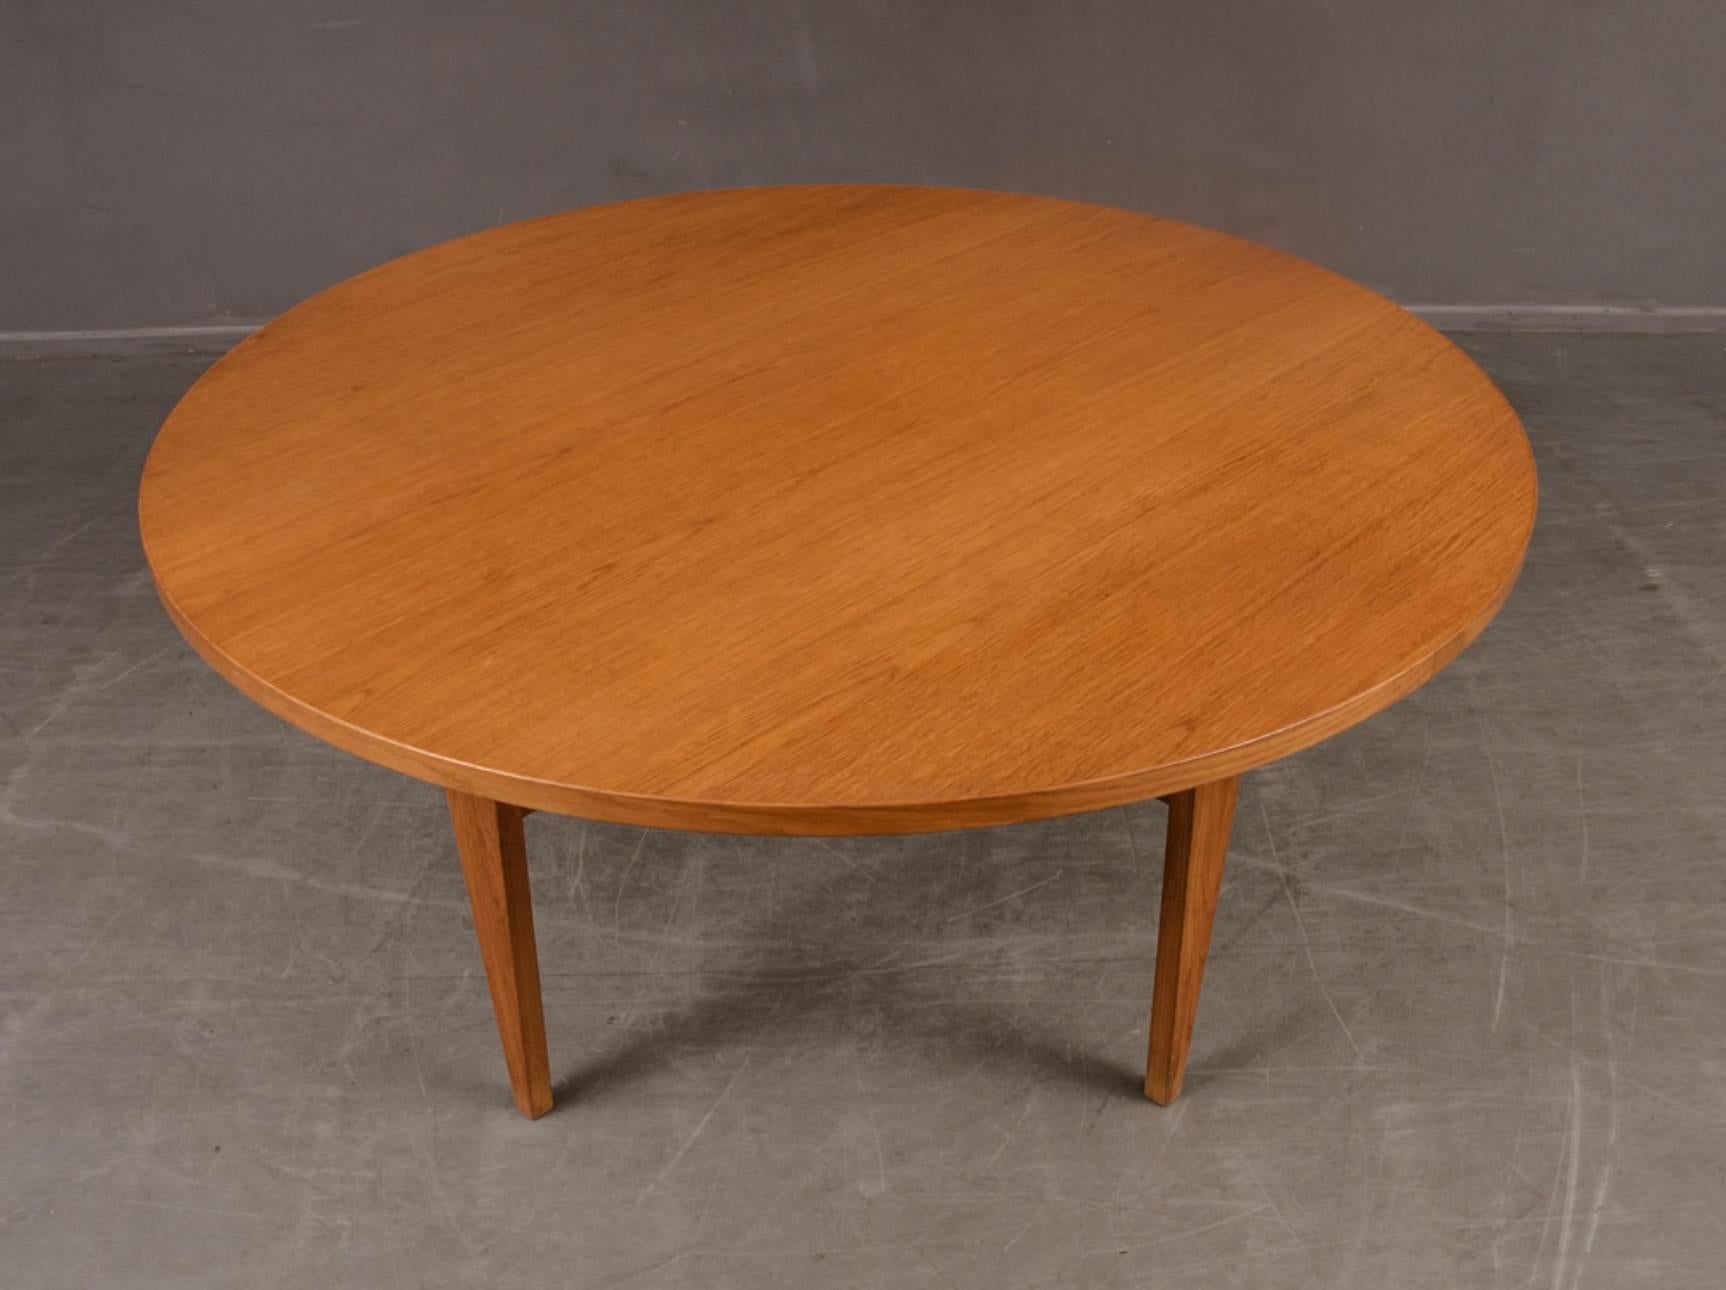 Round dining table by Hans J. Wegner in oak with keyhole shapes in legs.
Double stamped GETAMA, Produced by GETAMA.